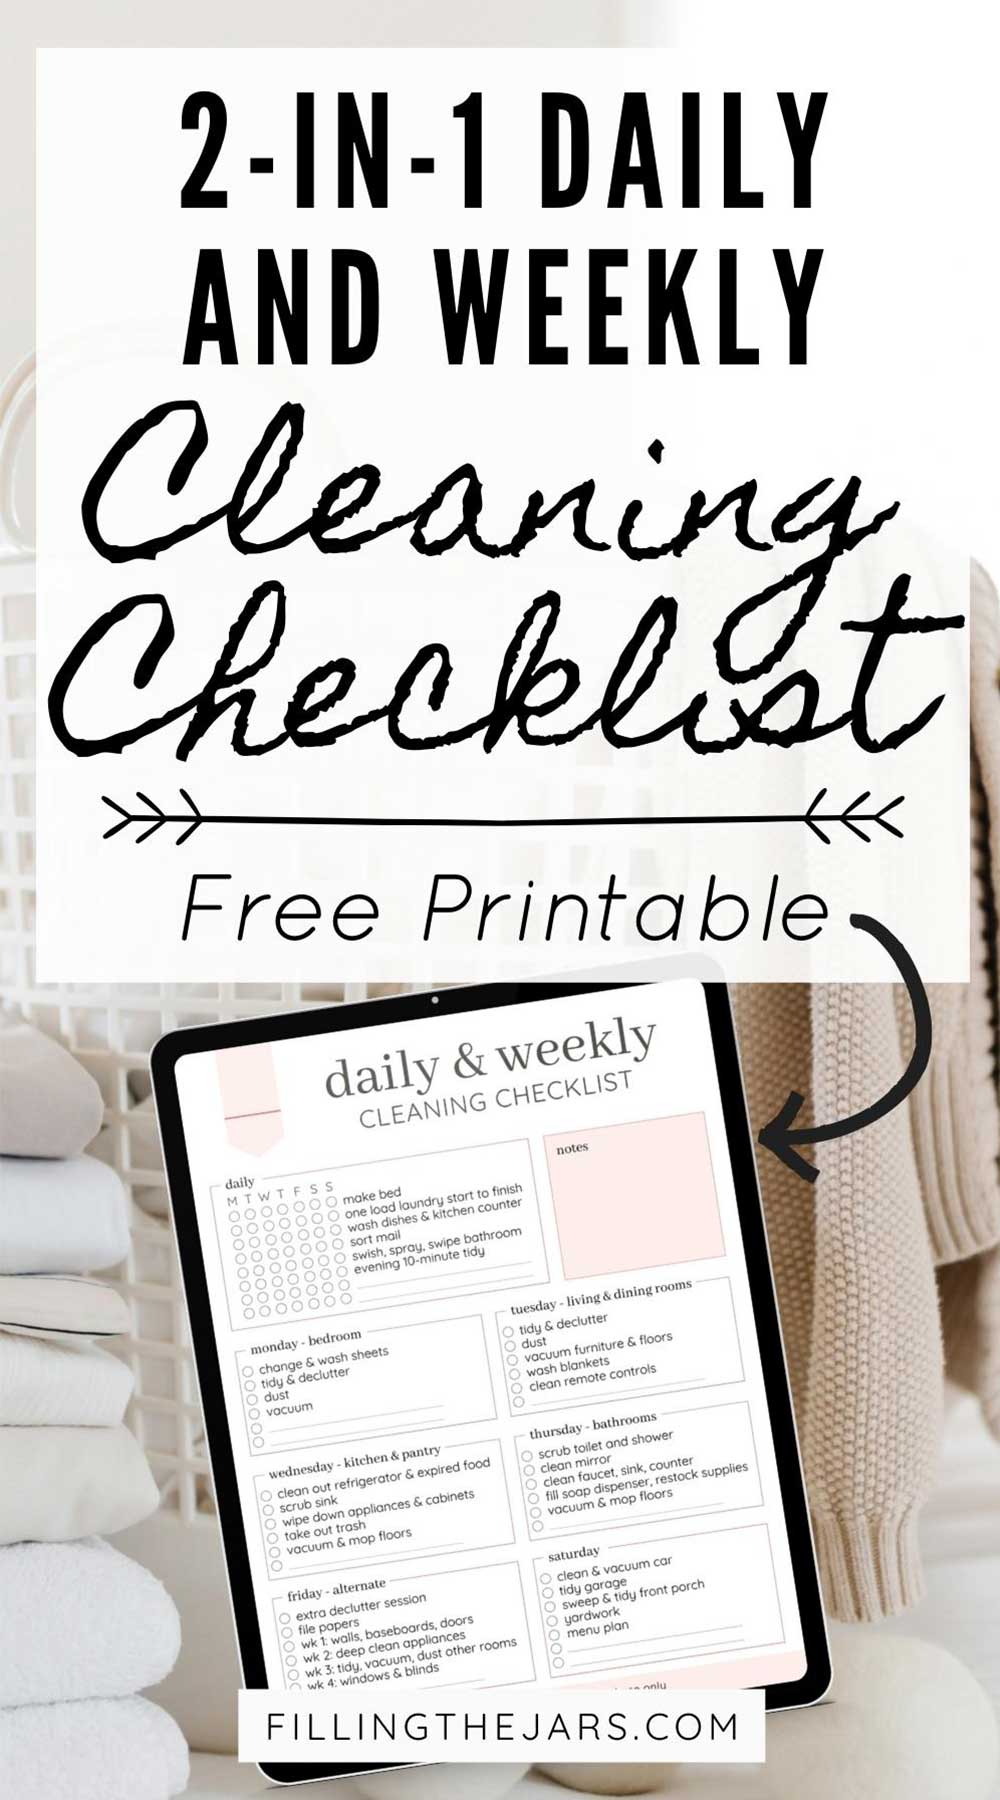 Text 2-in-1 daily and weekly cleaning checklist on white background over image of laundry basket and pile of folded clothes.